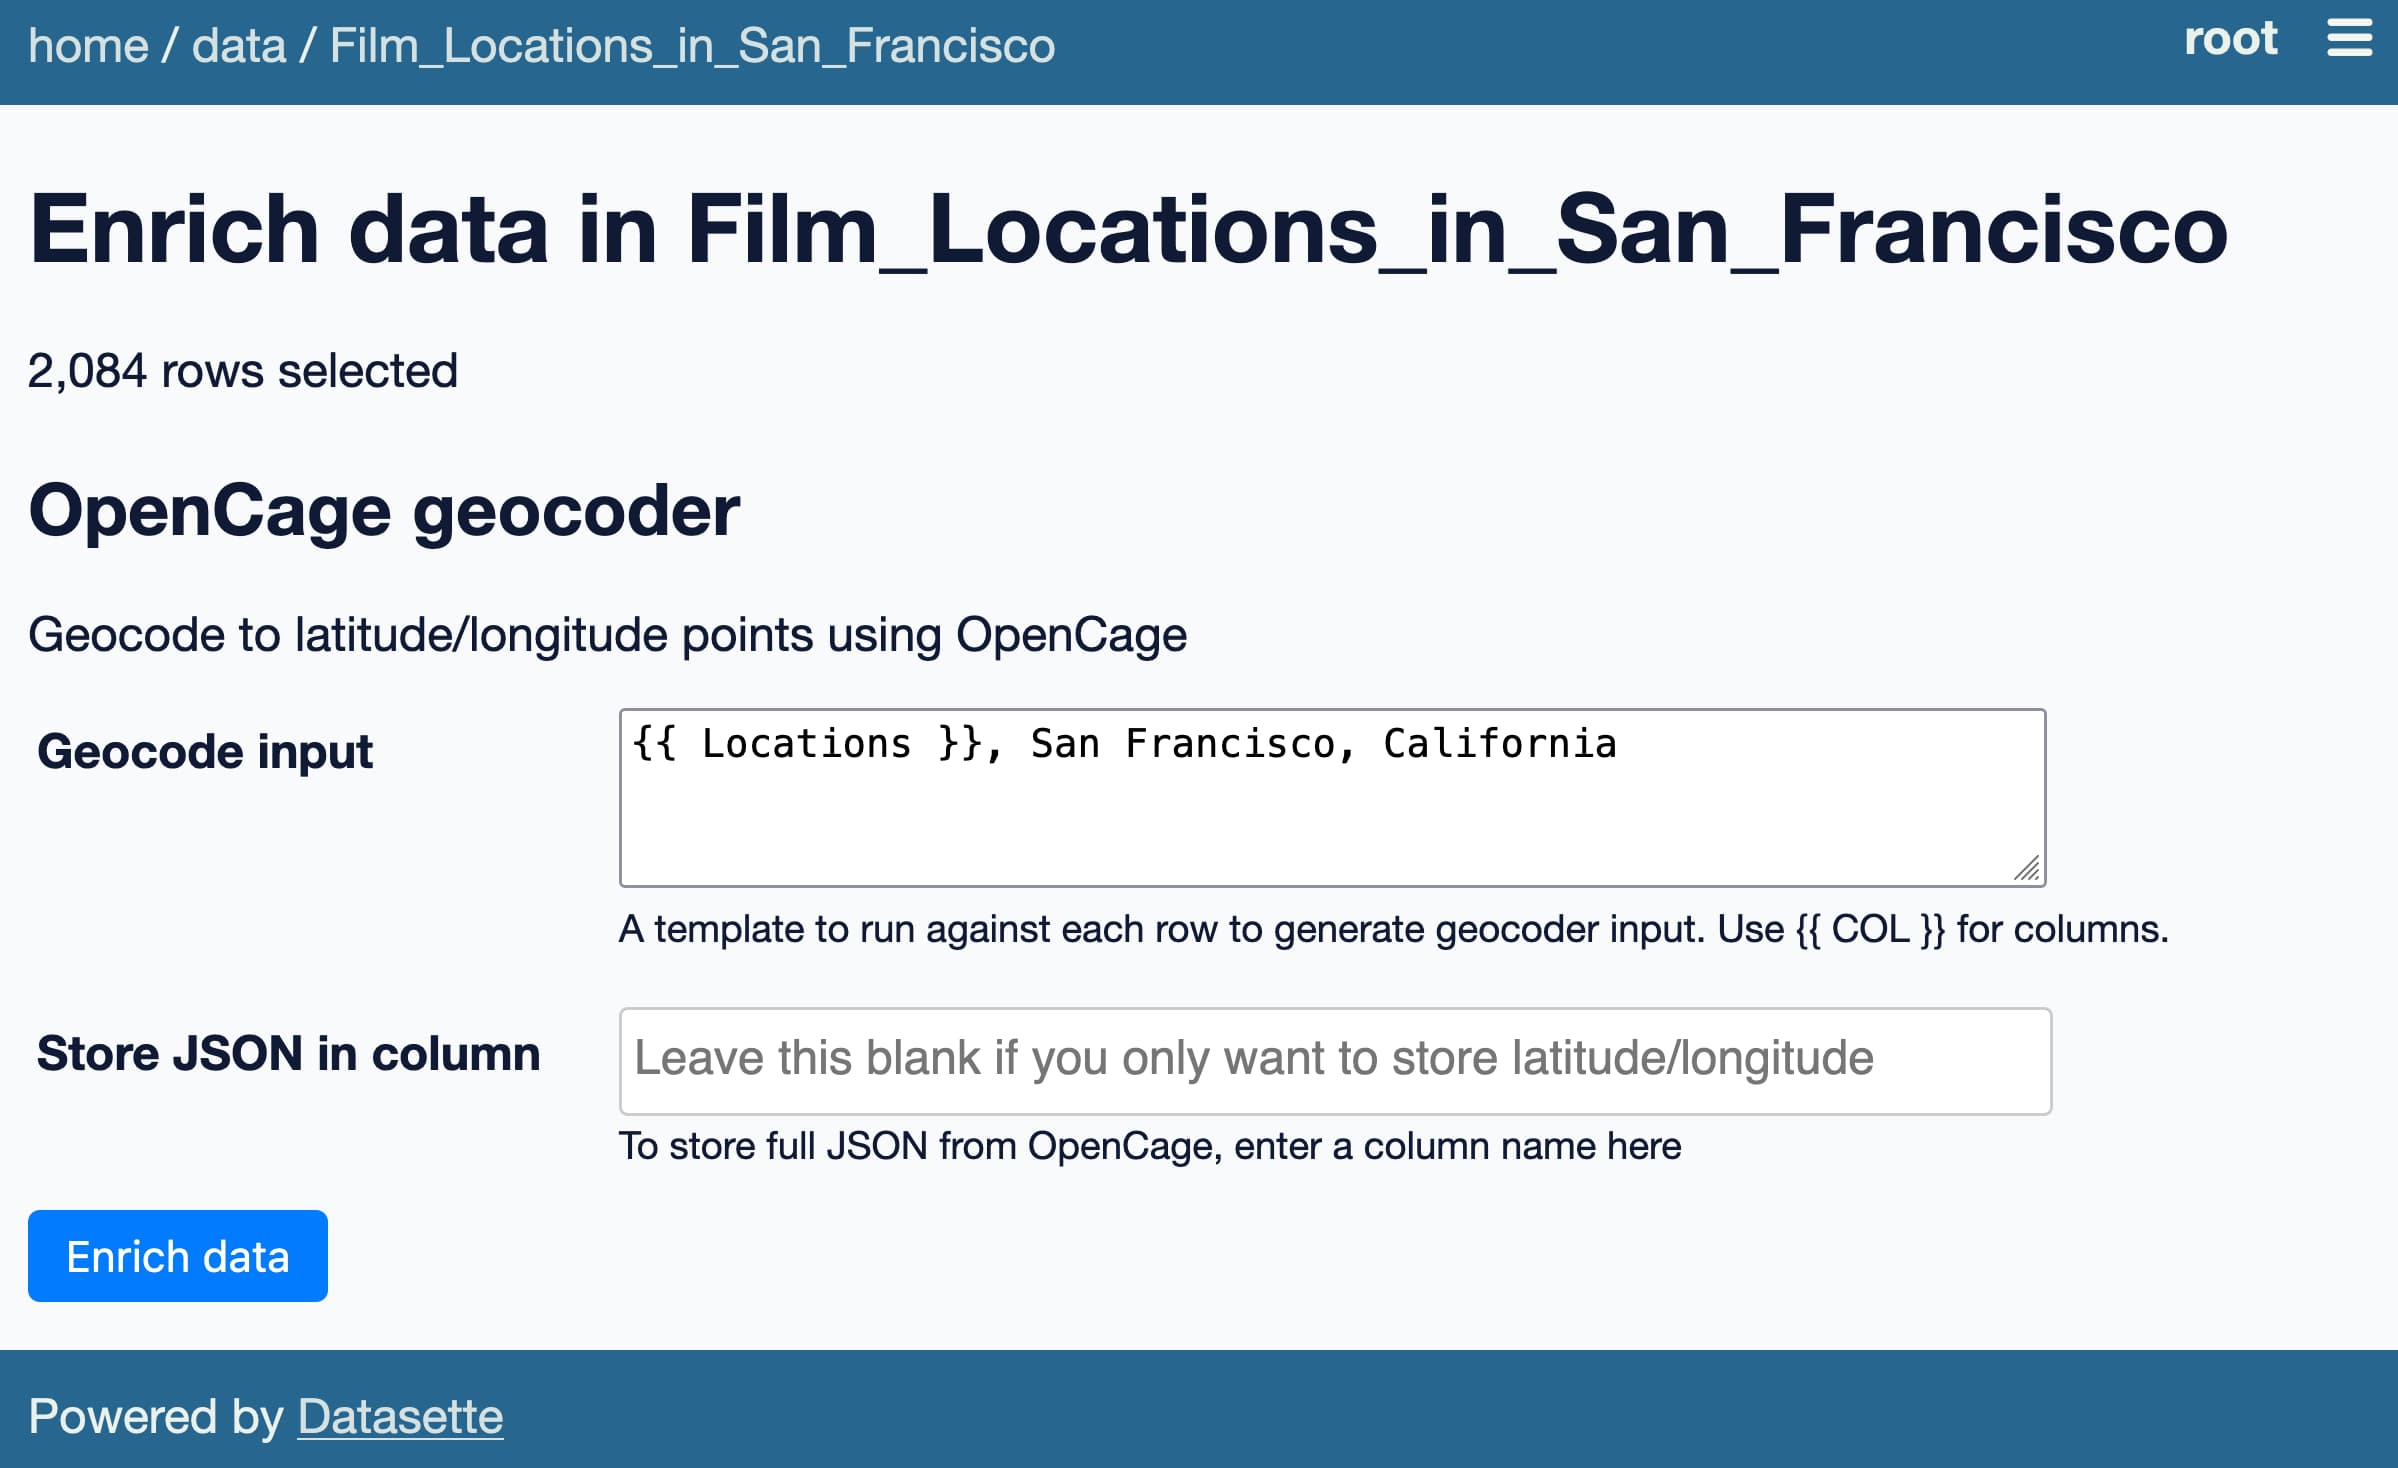 Datasette screenshot: Enrich data in Film_Locations_in_San_Francisco. 2,084 rows selected. OpenCage geocoder. Geocode to latitude/longitude points using OpenCage. Geocode input: {{ Locations }}, San Francisco, California. Store JSON in column checkbox. Enrich data button.